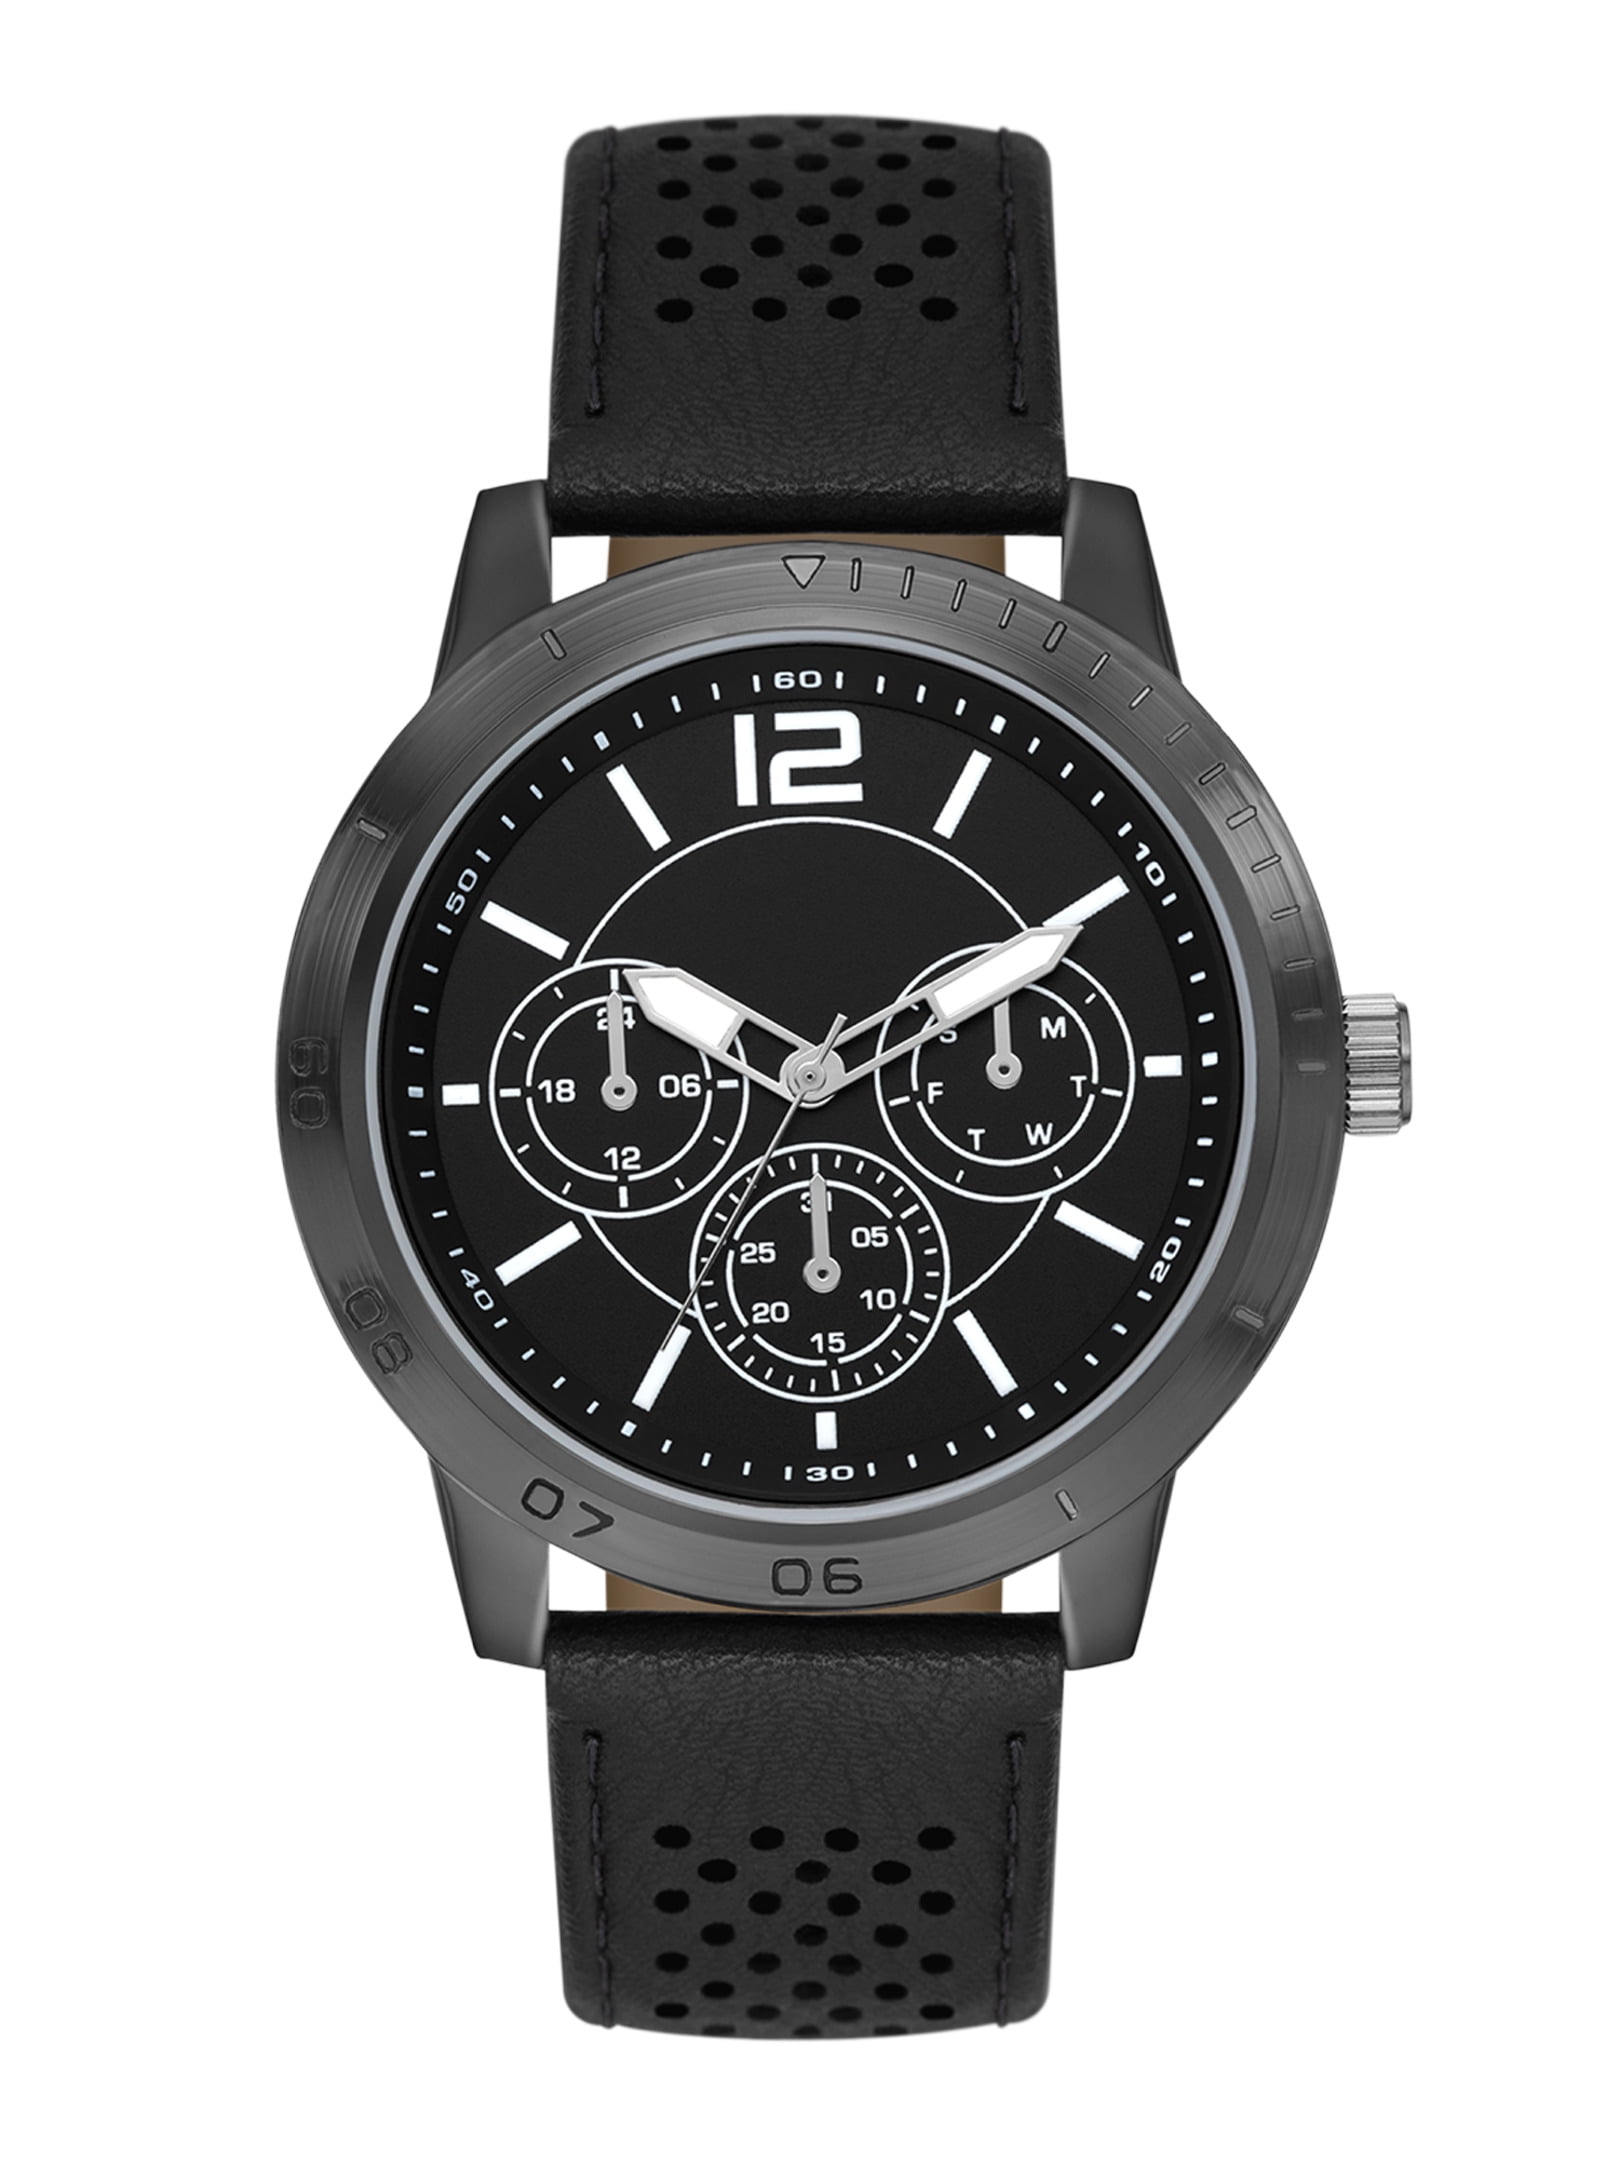 George Men's Watch with Brushed Gunmetal Tone Case, Black dial with 3 Faux Sub Dials and Black Perforated Vegan Leather Band (FMDOGE049)